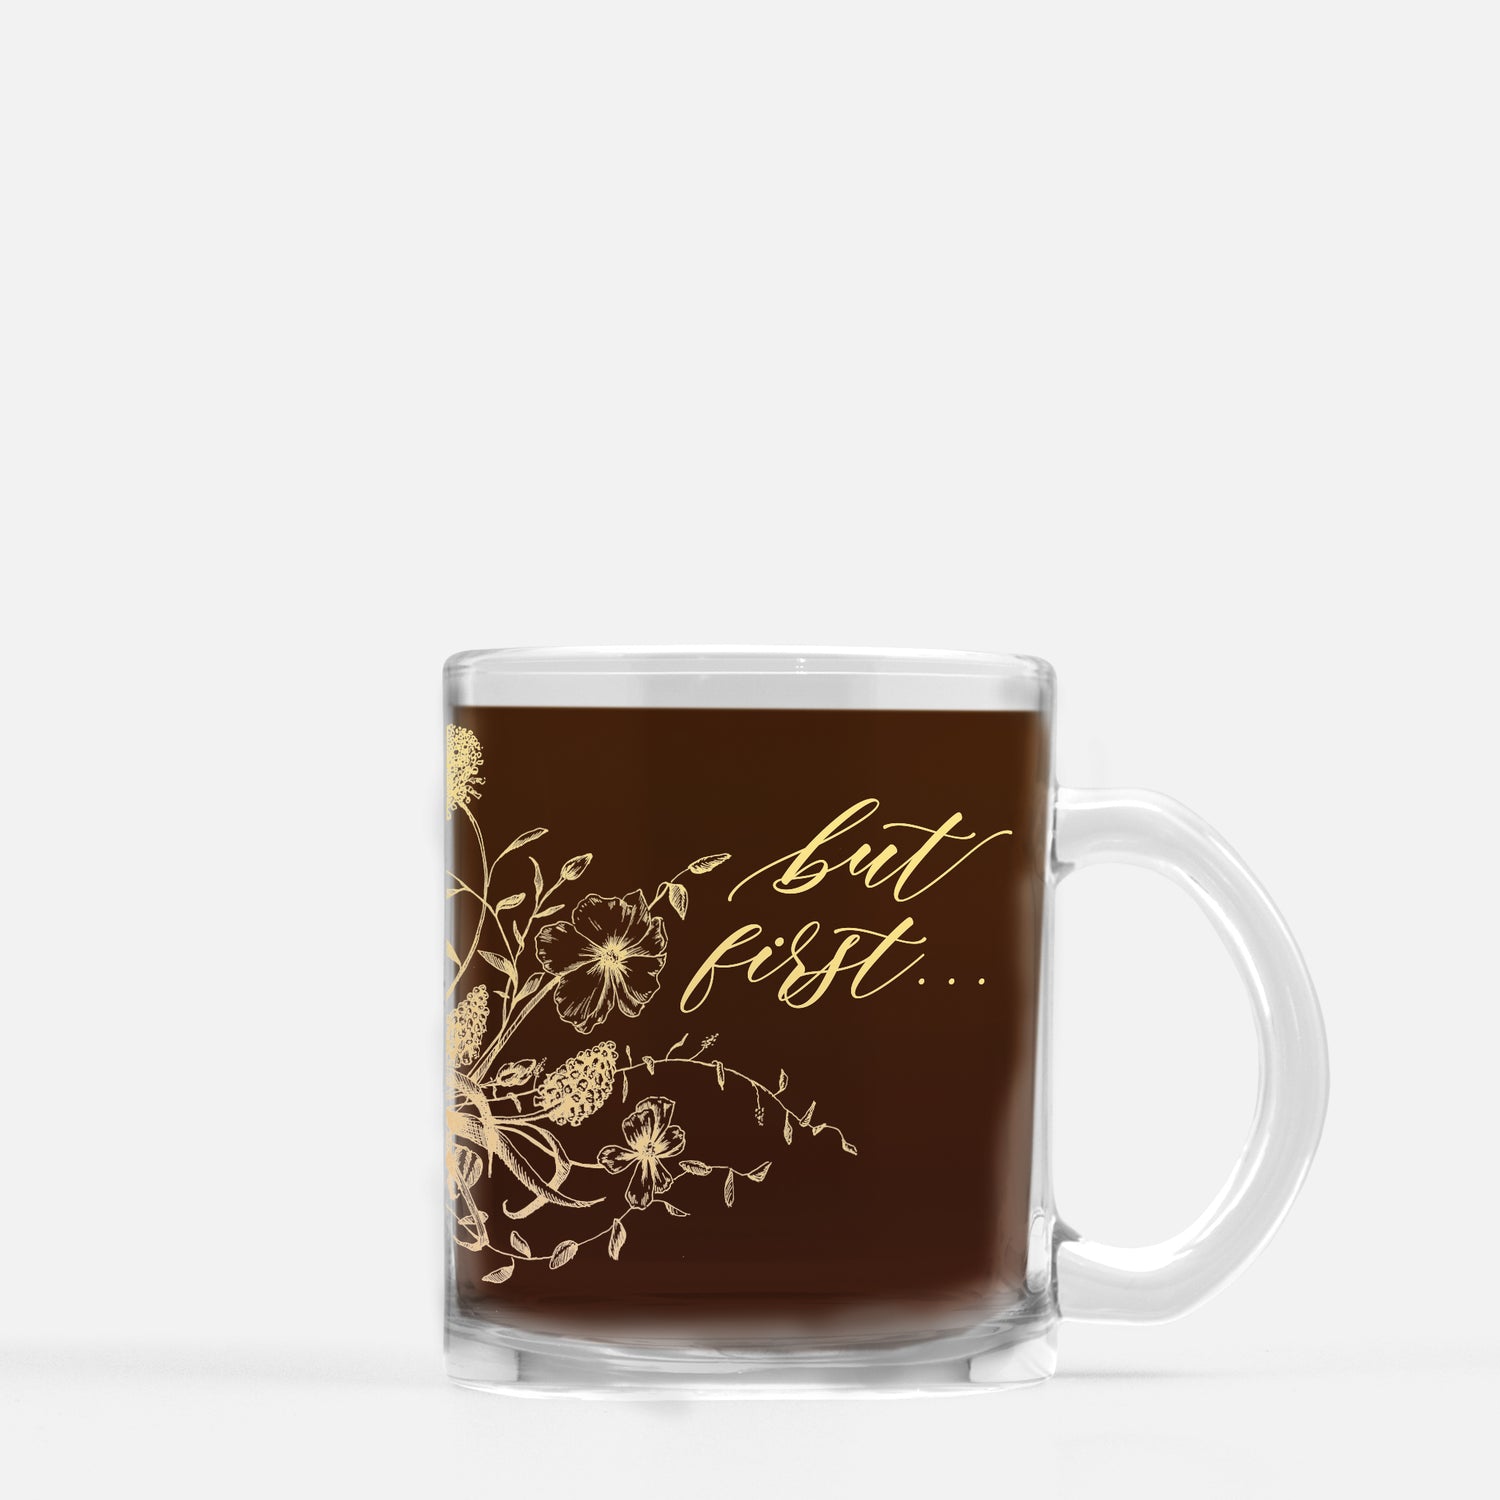 Mug with flowers that says "But First..." in gold ink